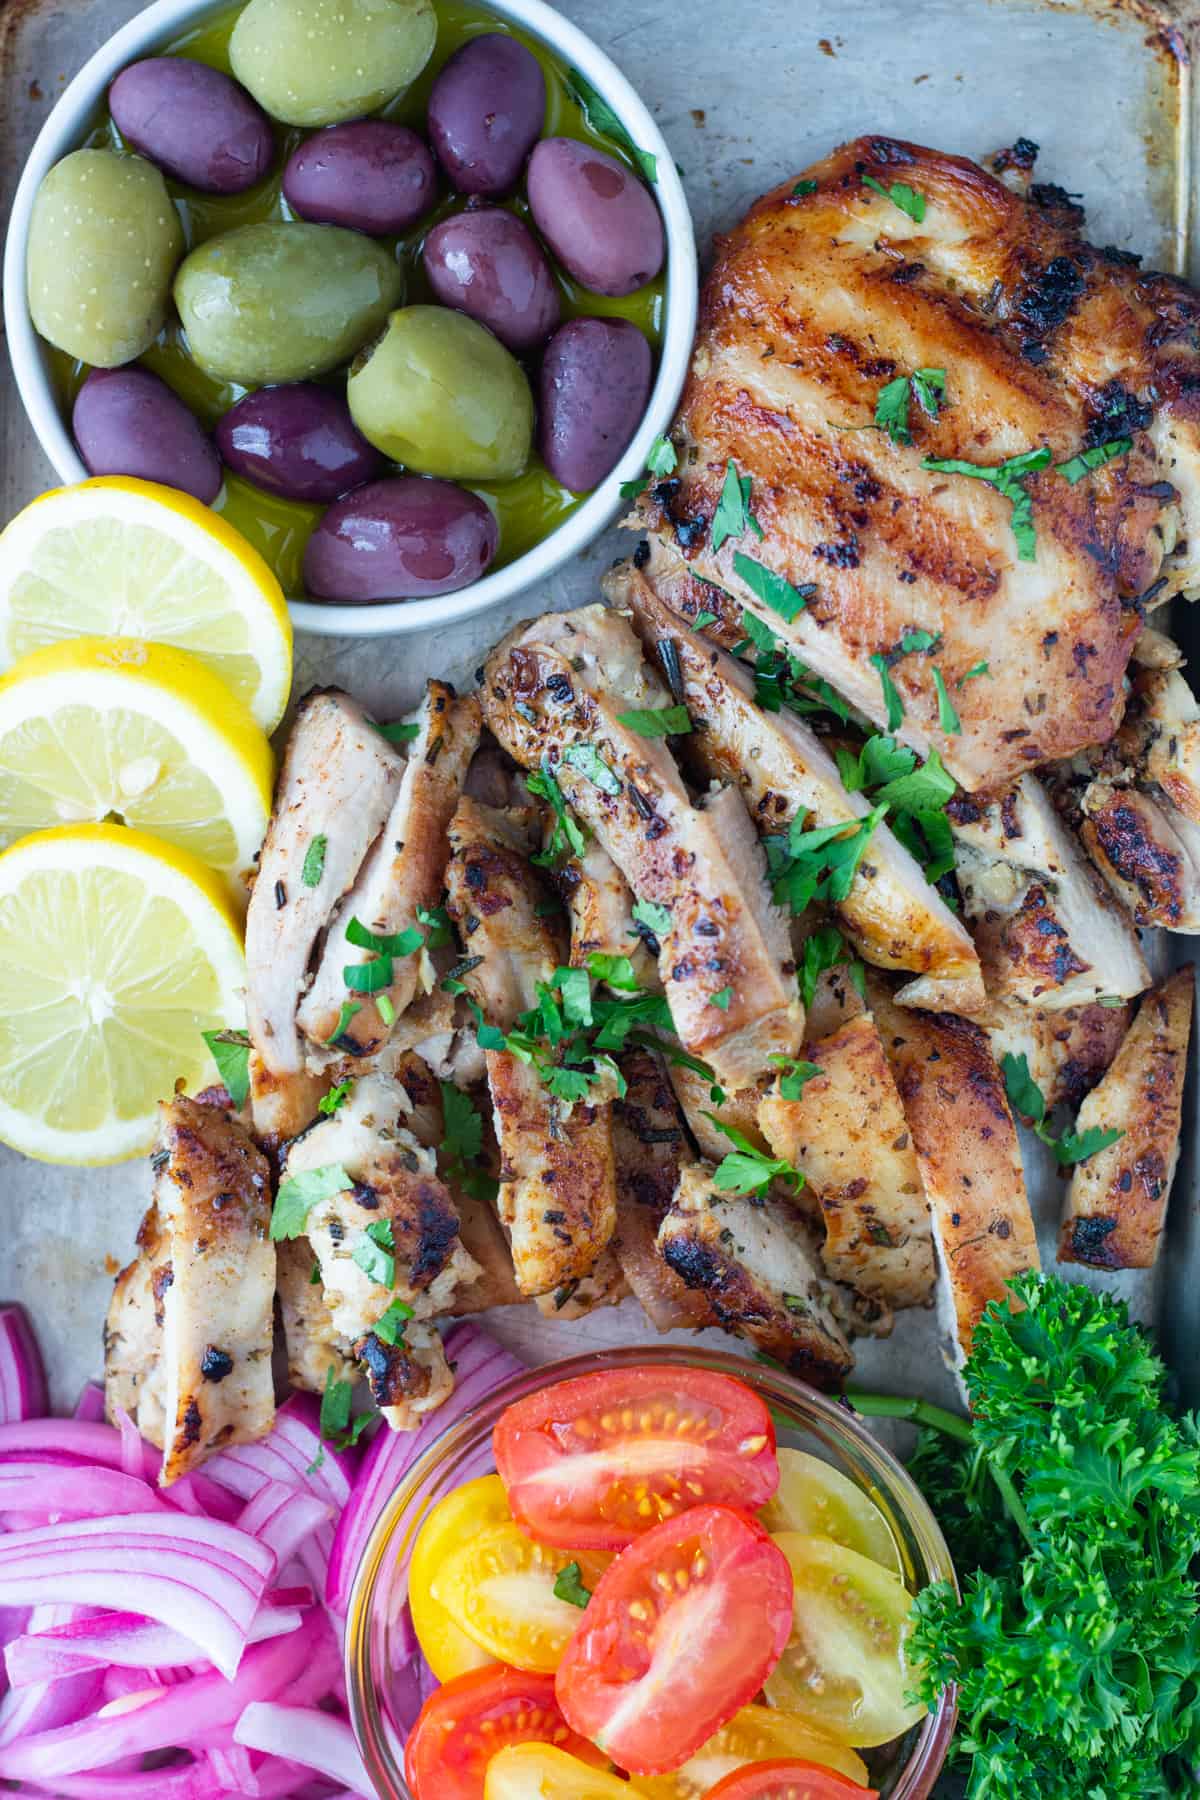 Marinated chicken can be grilled or seared in a pan.